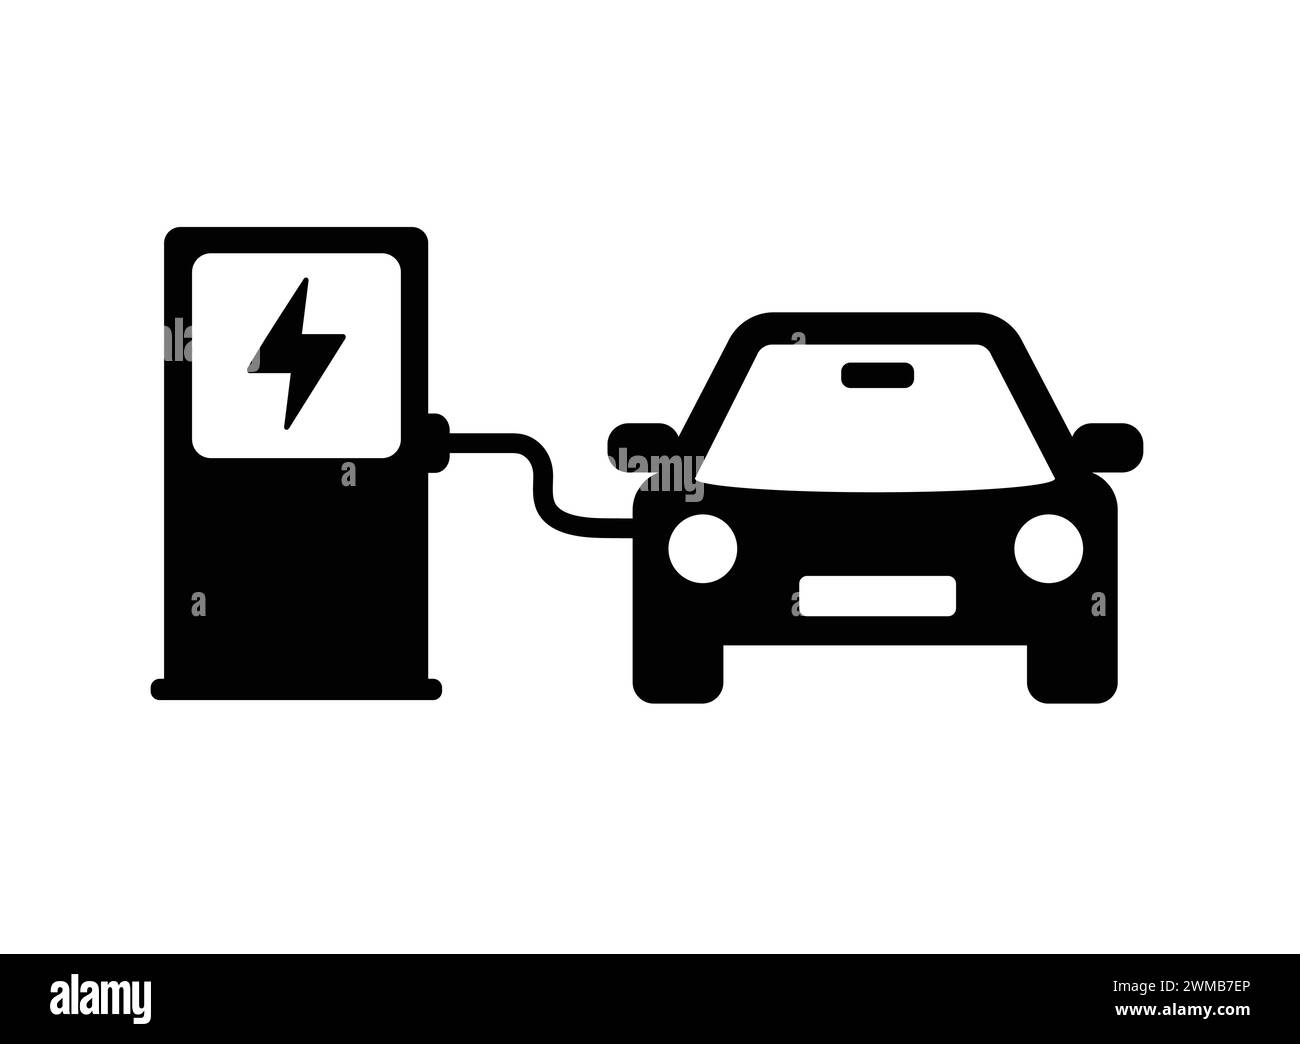 Electric Vehicle Charging Station Icon. EV Charging Station Road Sign. Electric Car Recharge Icon. Electrical Charging Station Symbol. Electric Fuel Stock Vector